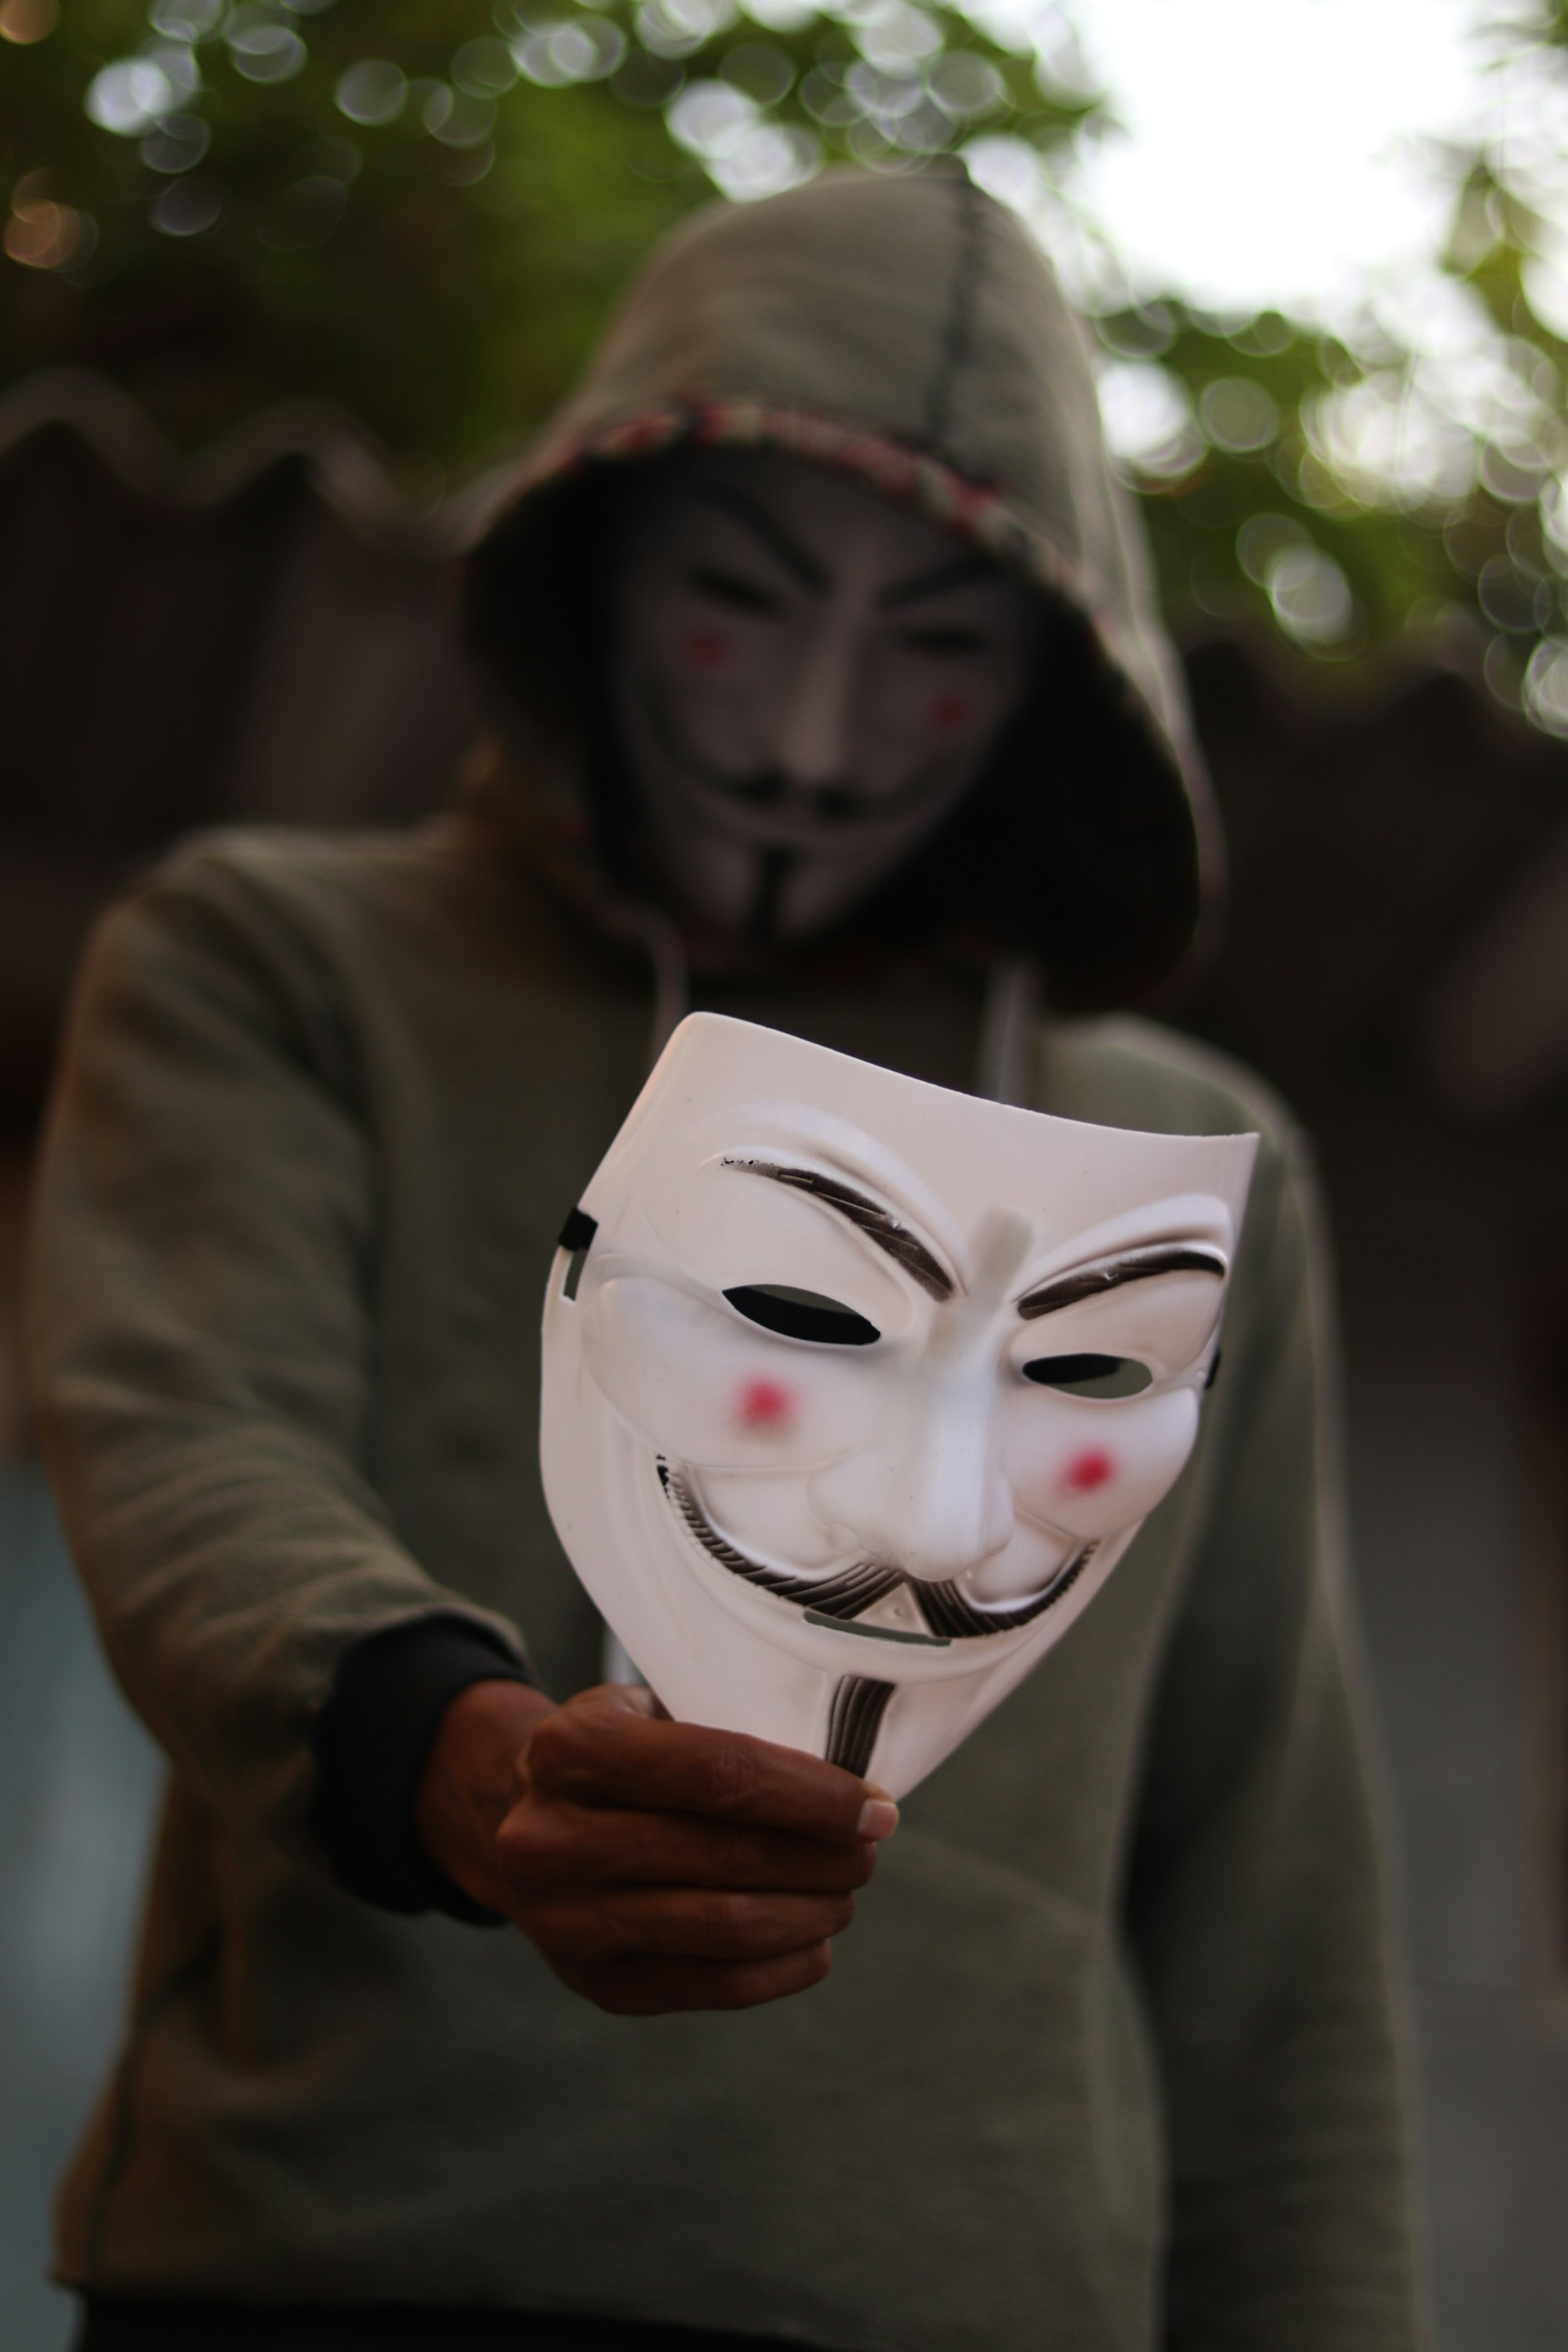 "Anonymous" hurt by arrests but hard to kill